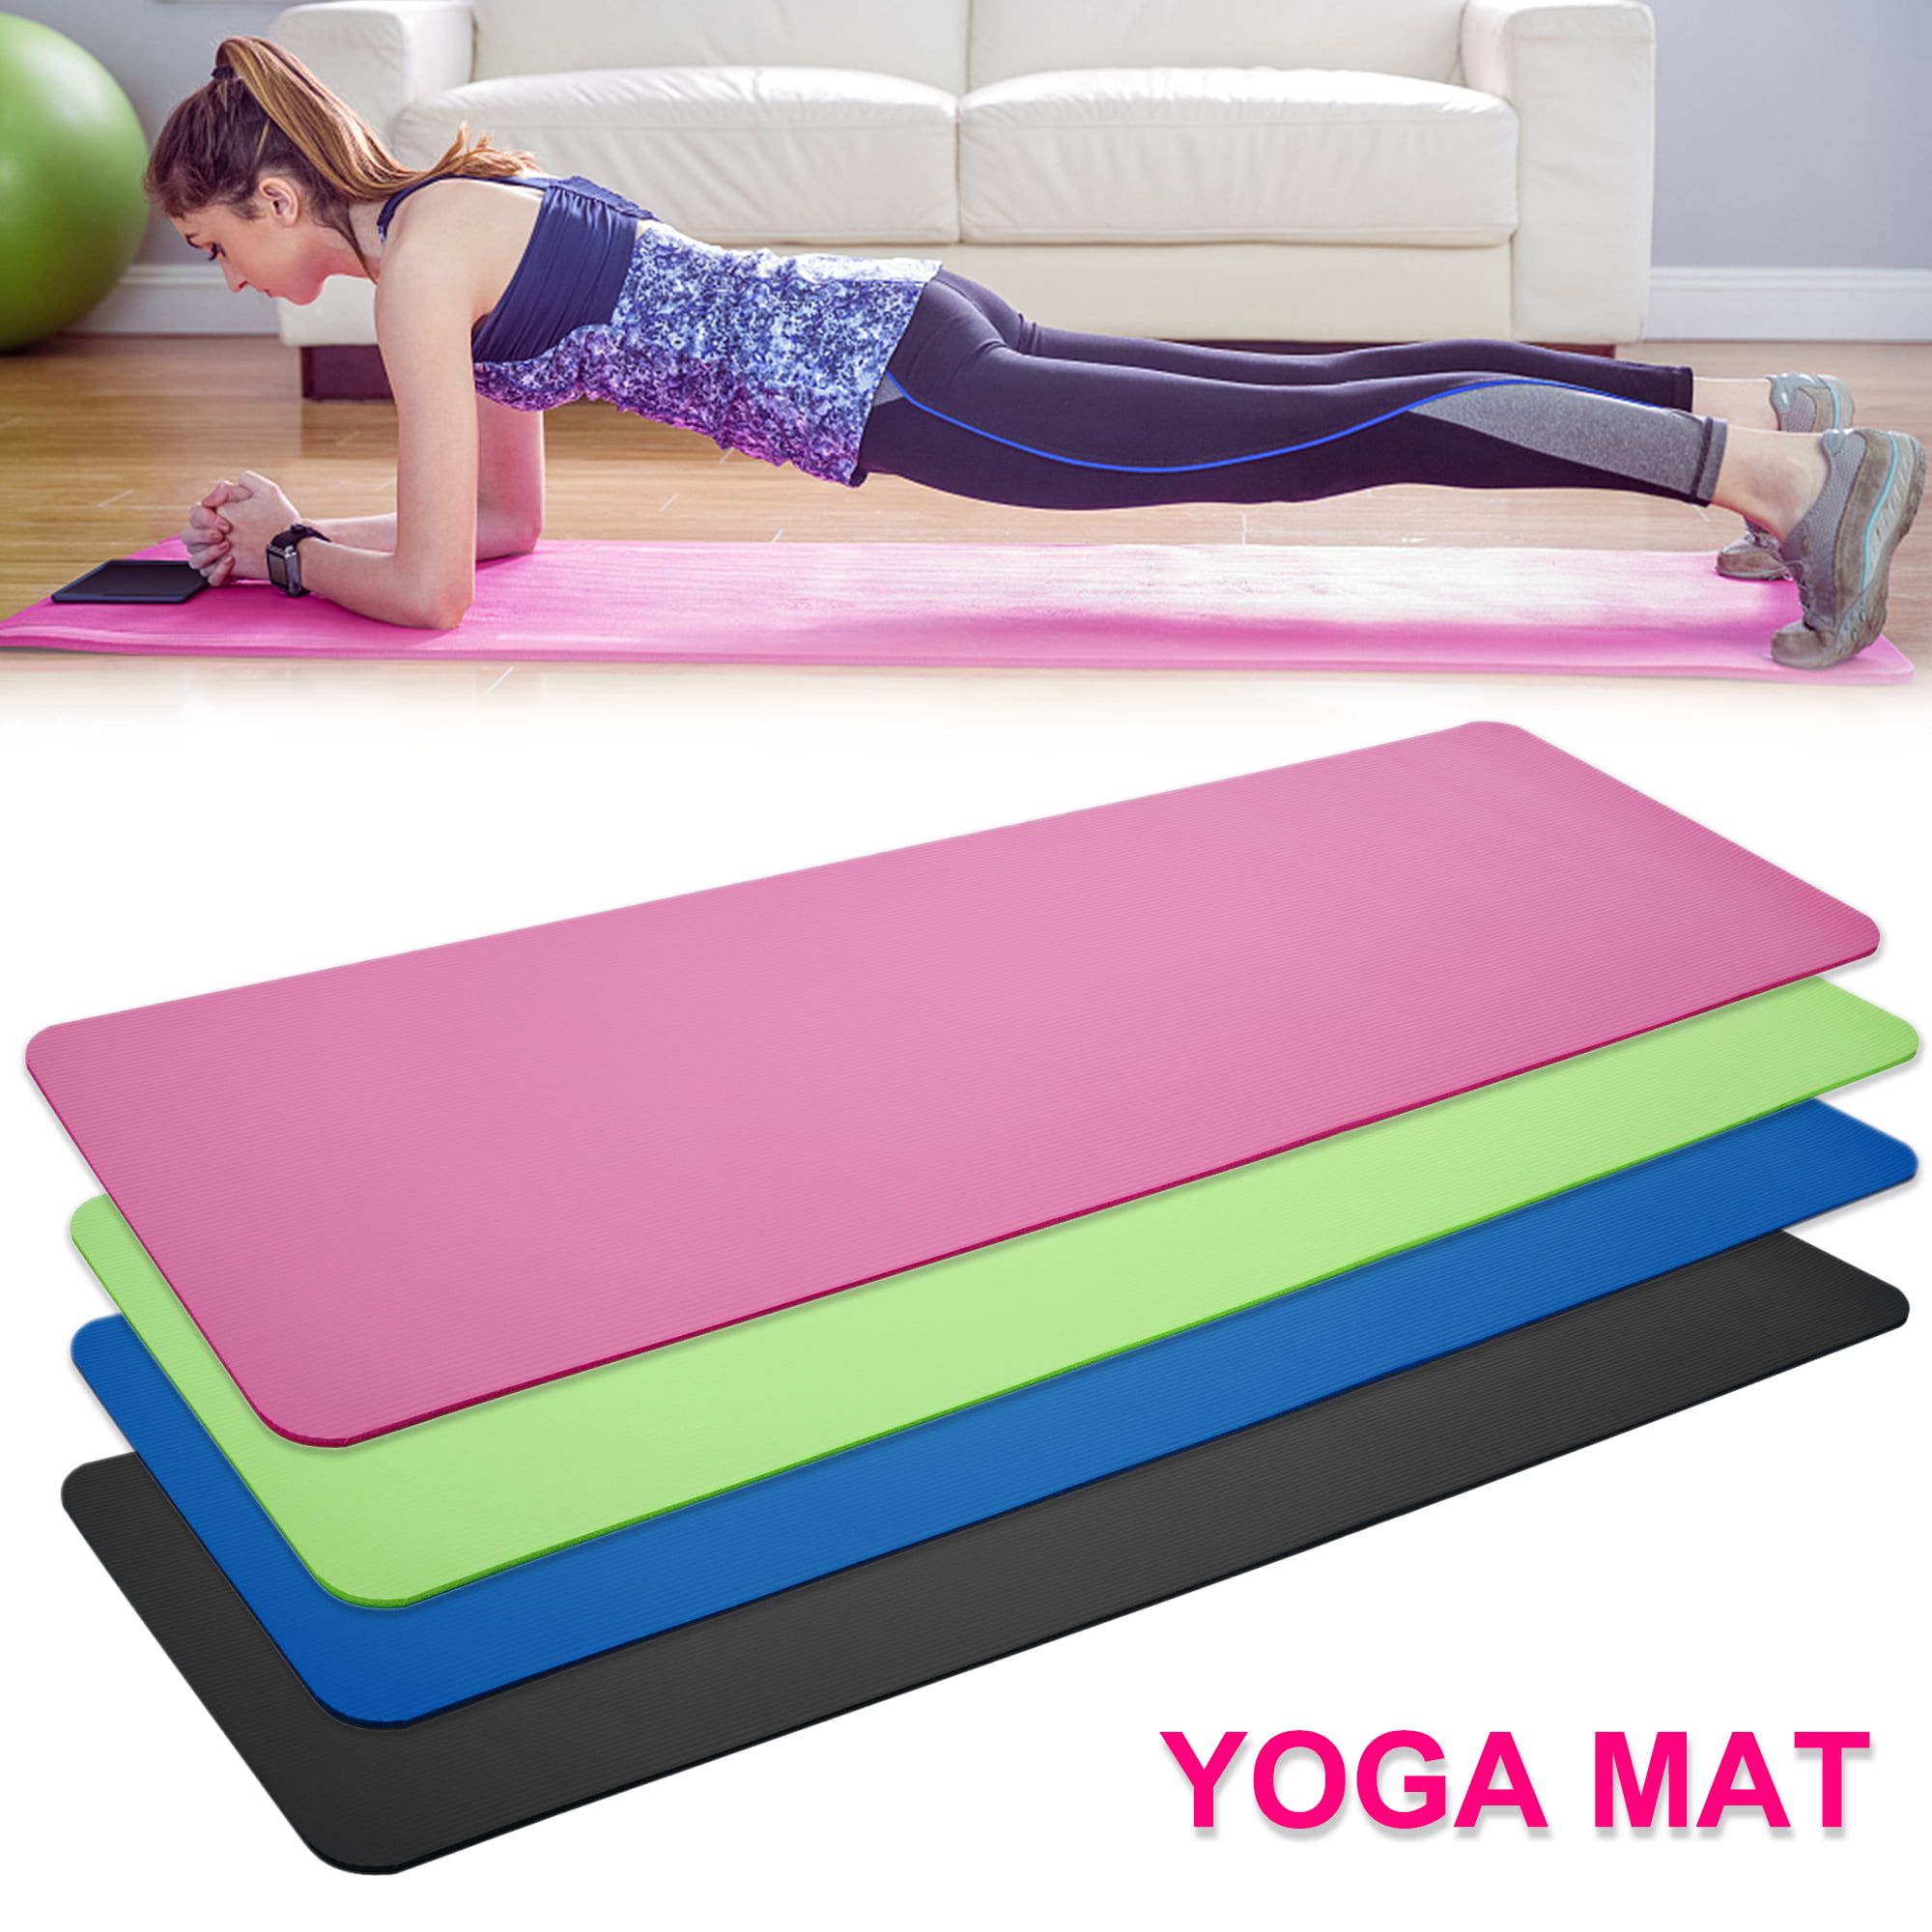 10mm Thick Yoga Mat Exercise Fitness Pilates Camping Gym Meditation Pad Non-Slip 